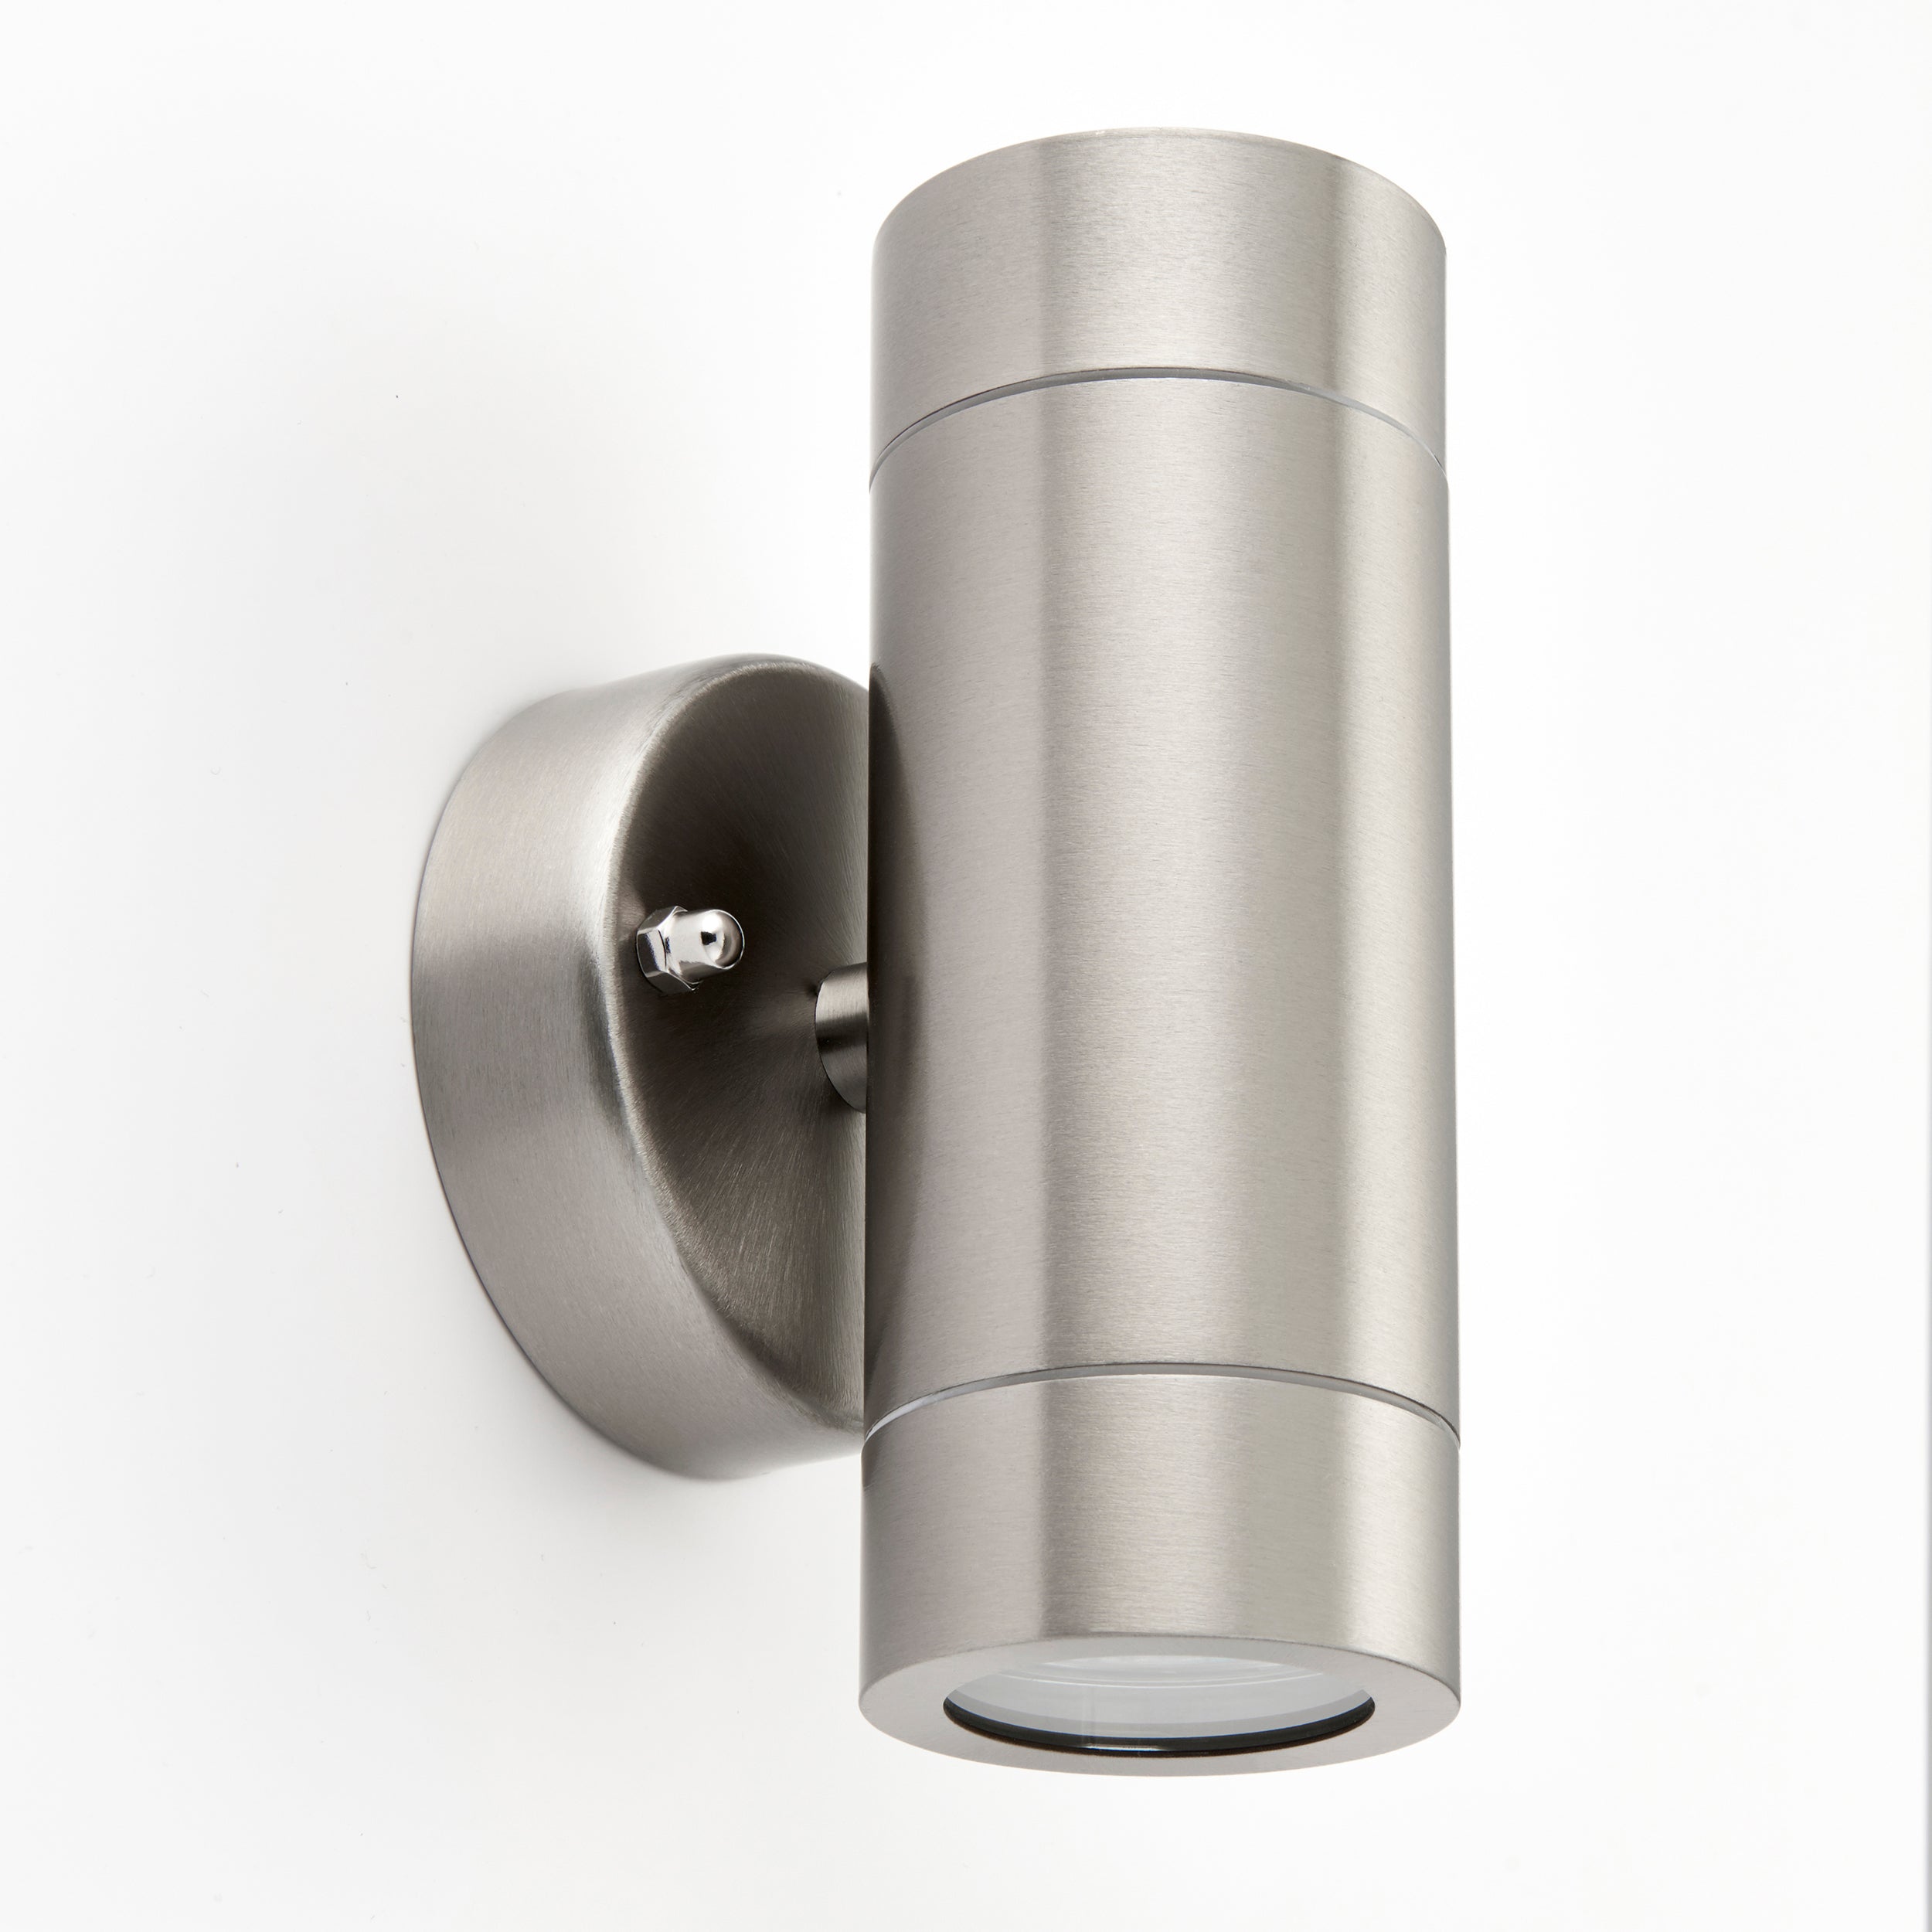 Saxby Palin Brushed Stainless Steel Outdoor Wall Light 2x35W GU10 IP44 - 13802